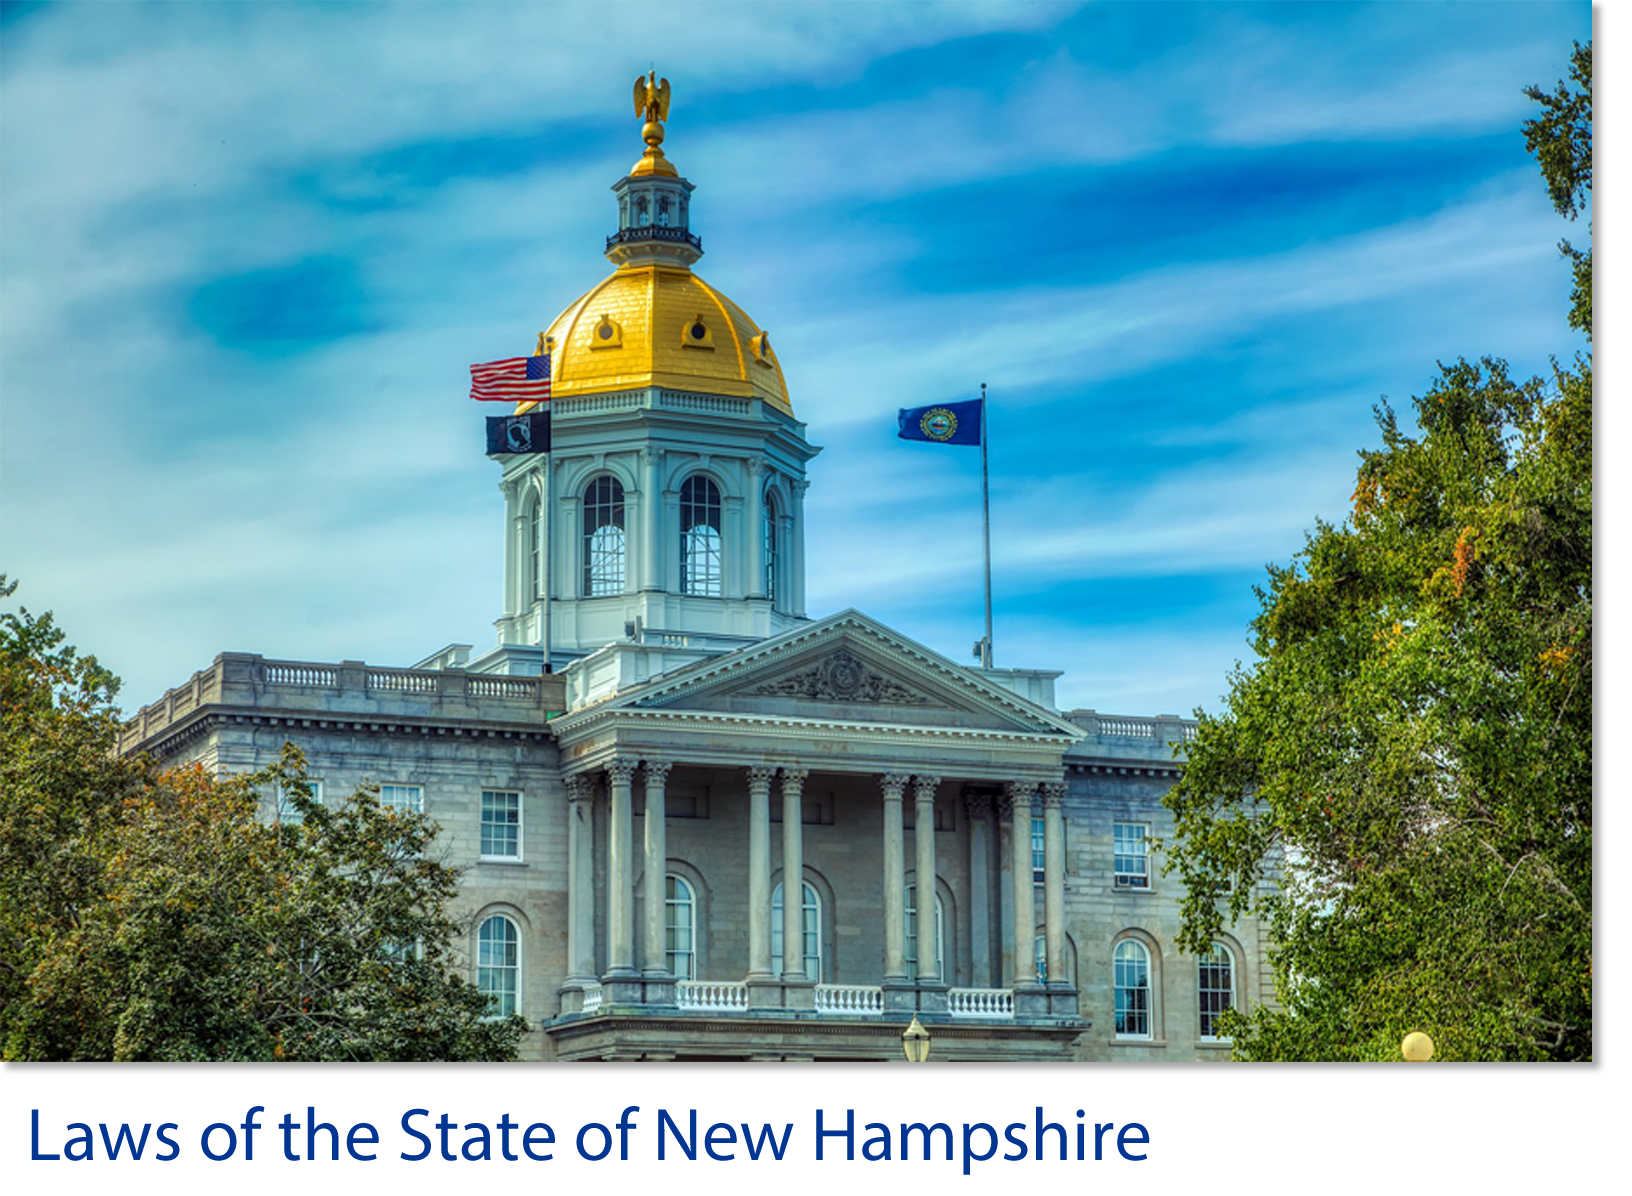 Laws of the State of New Hampshire